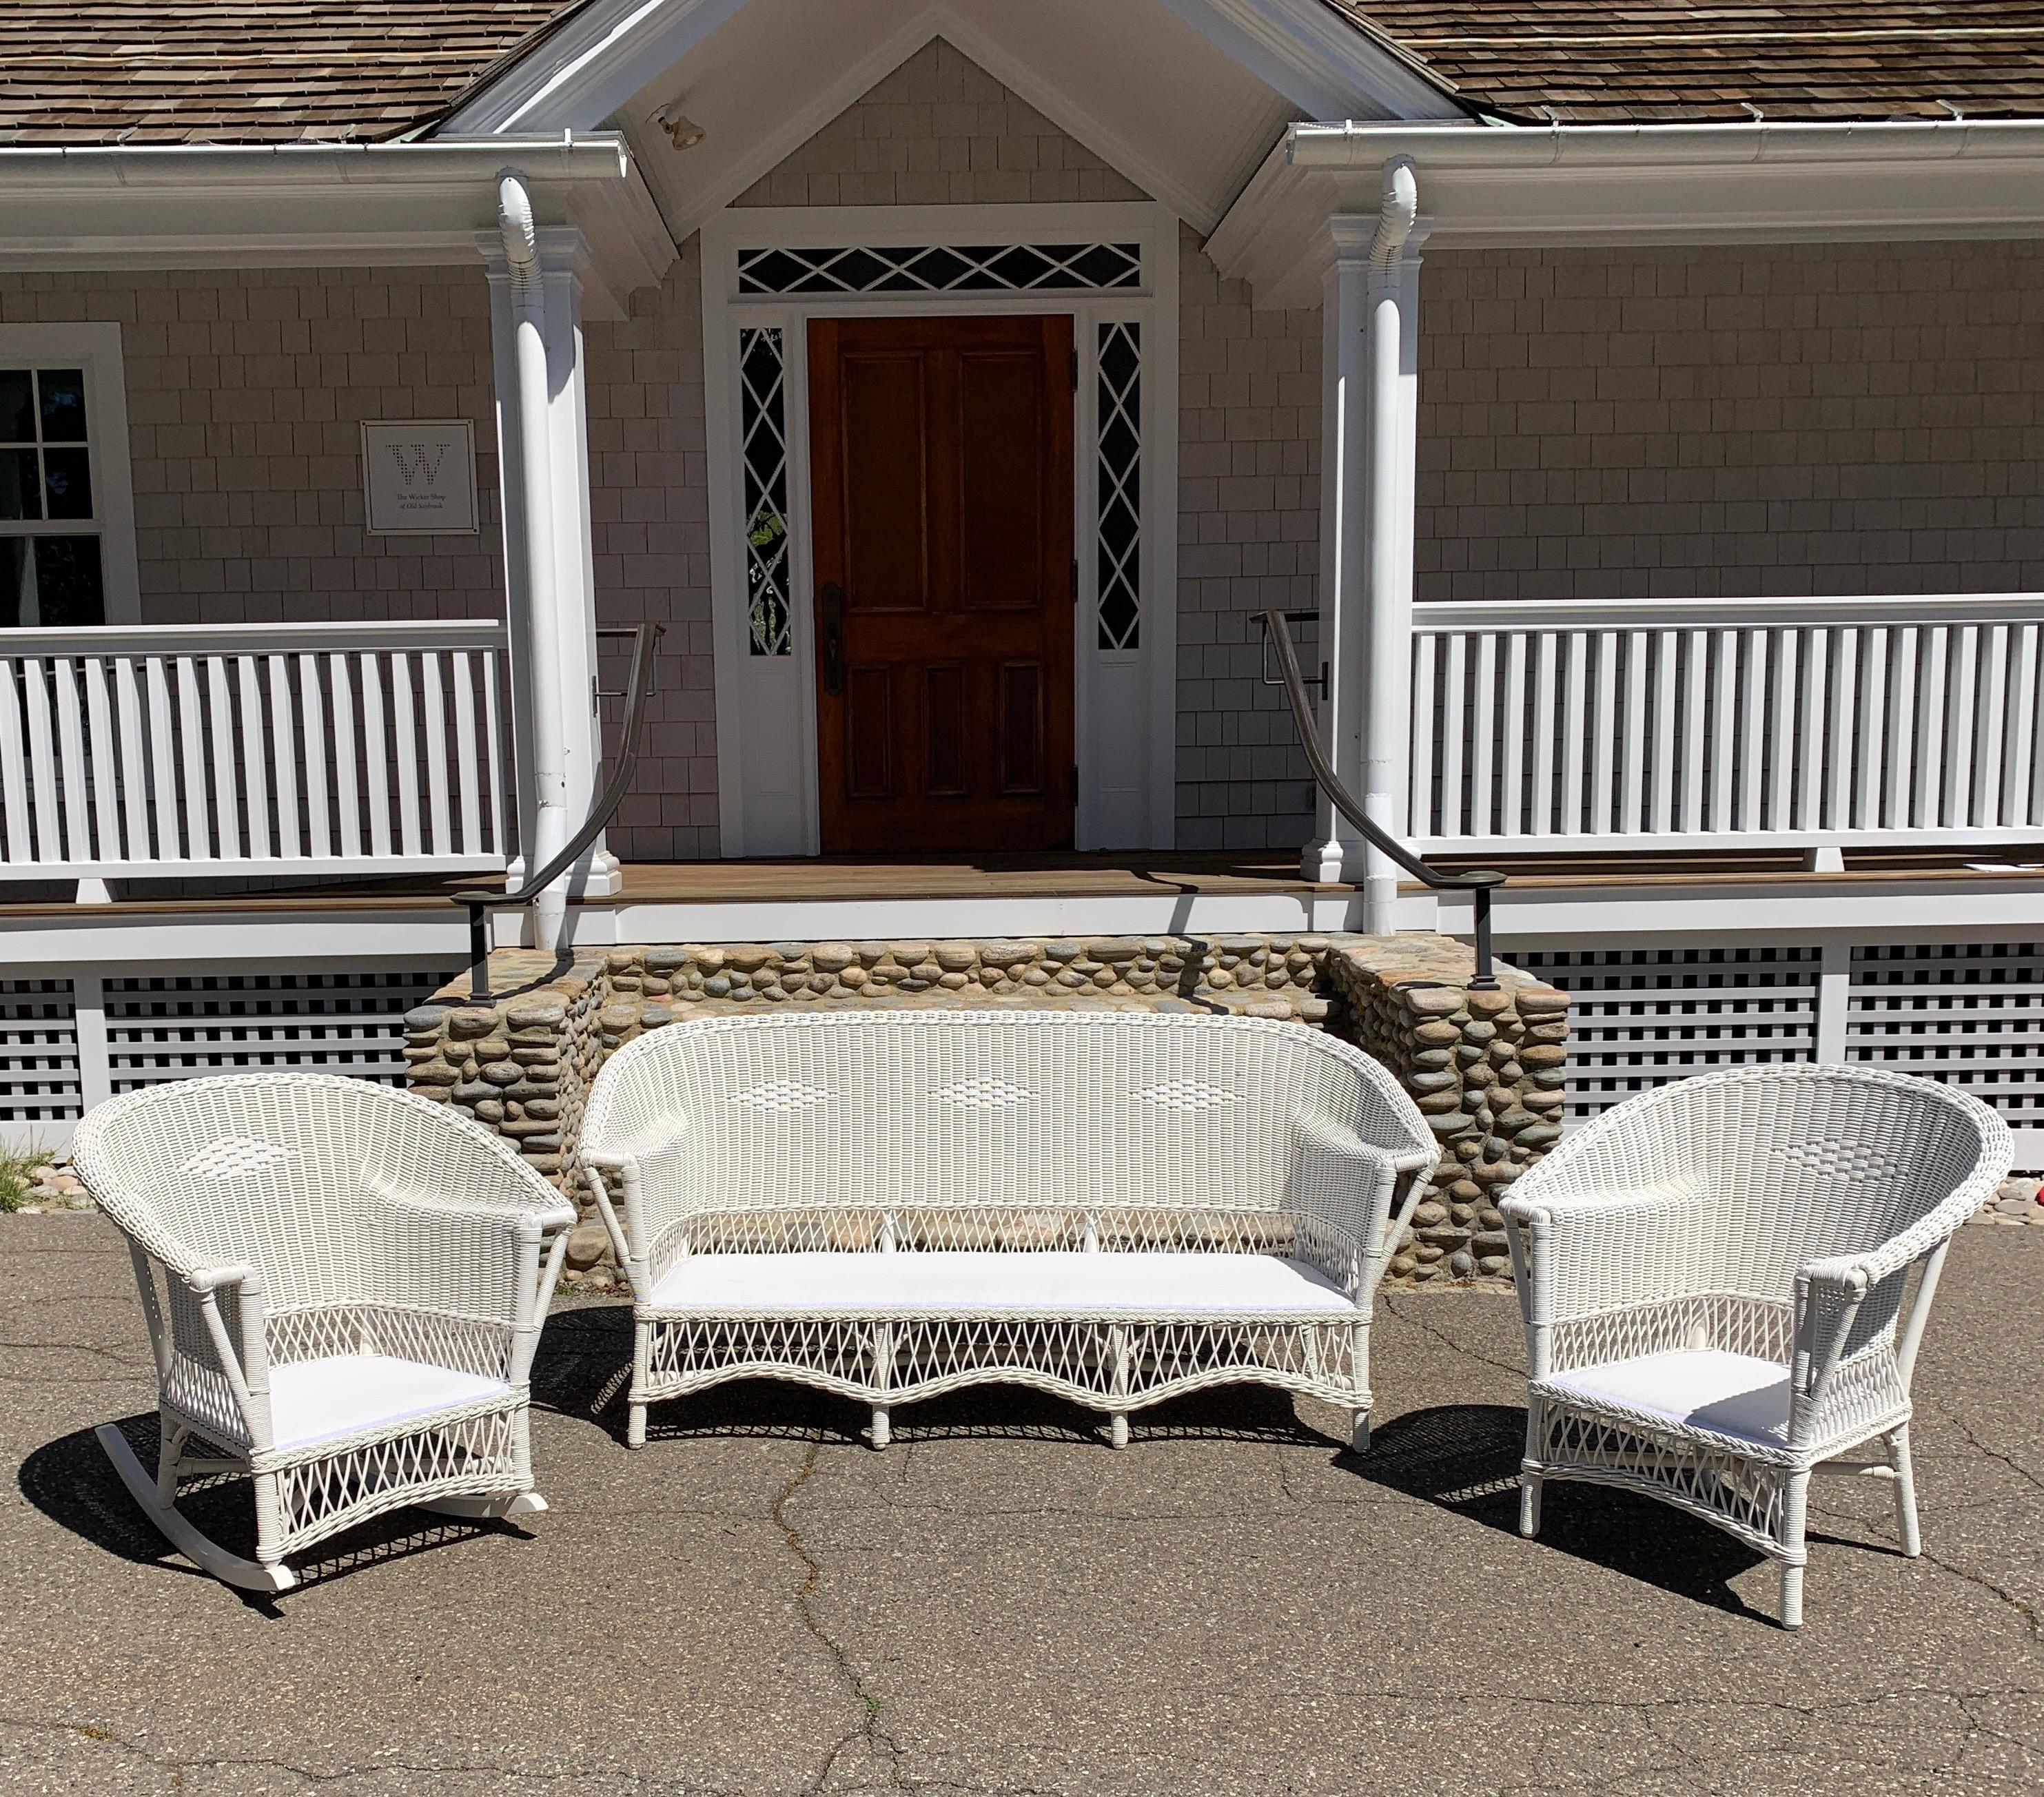 This is a classic three piece wicker set from the 1920’s freshly painted white and with new Sunbrella decking. The sofa measures 71” wide, 28” deep and 33” tall. The chair measures 31” wide, 27” deep, 34” tall. The rocker measures 31” wide, 34